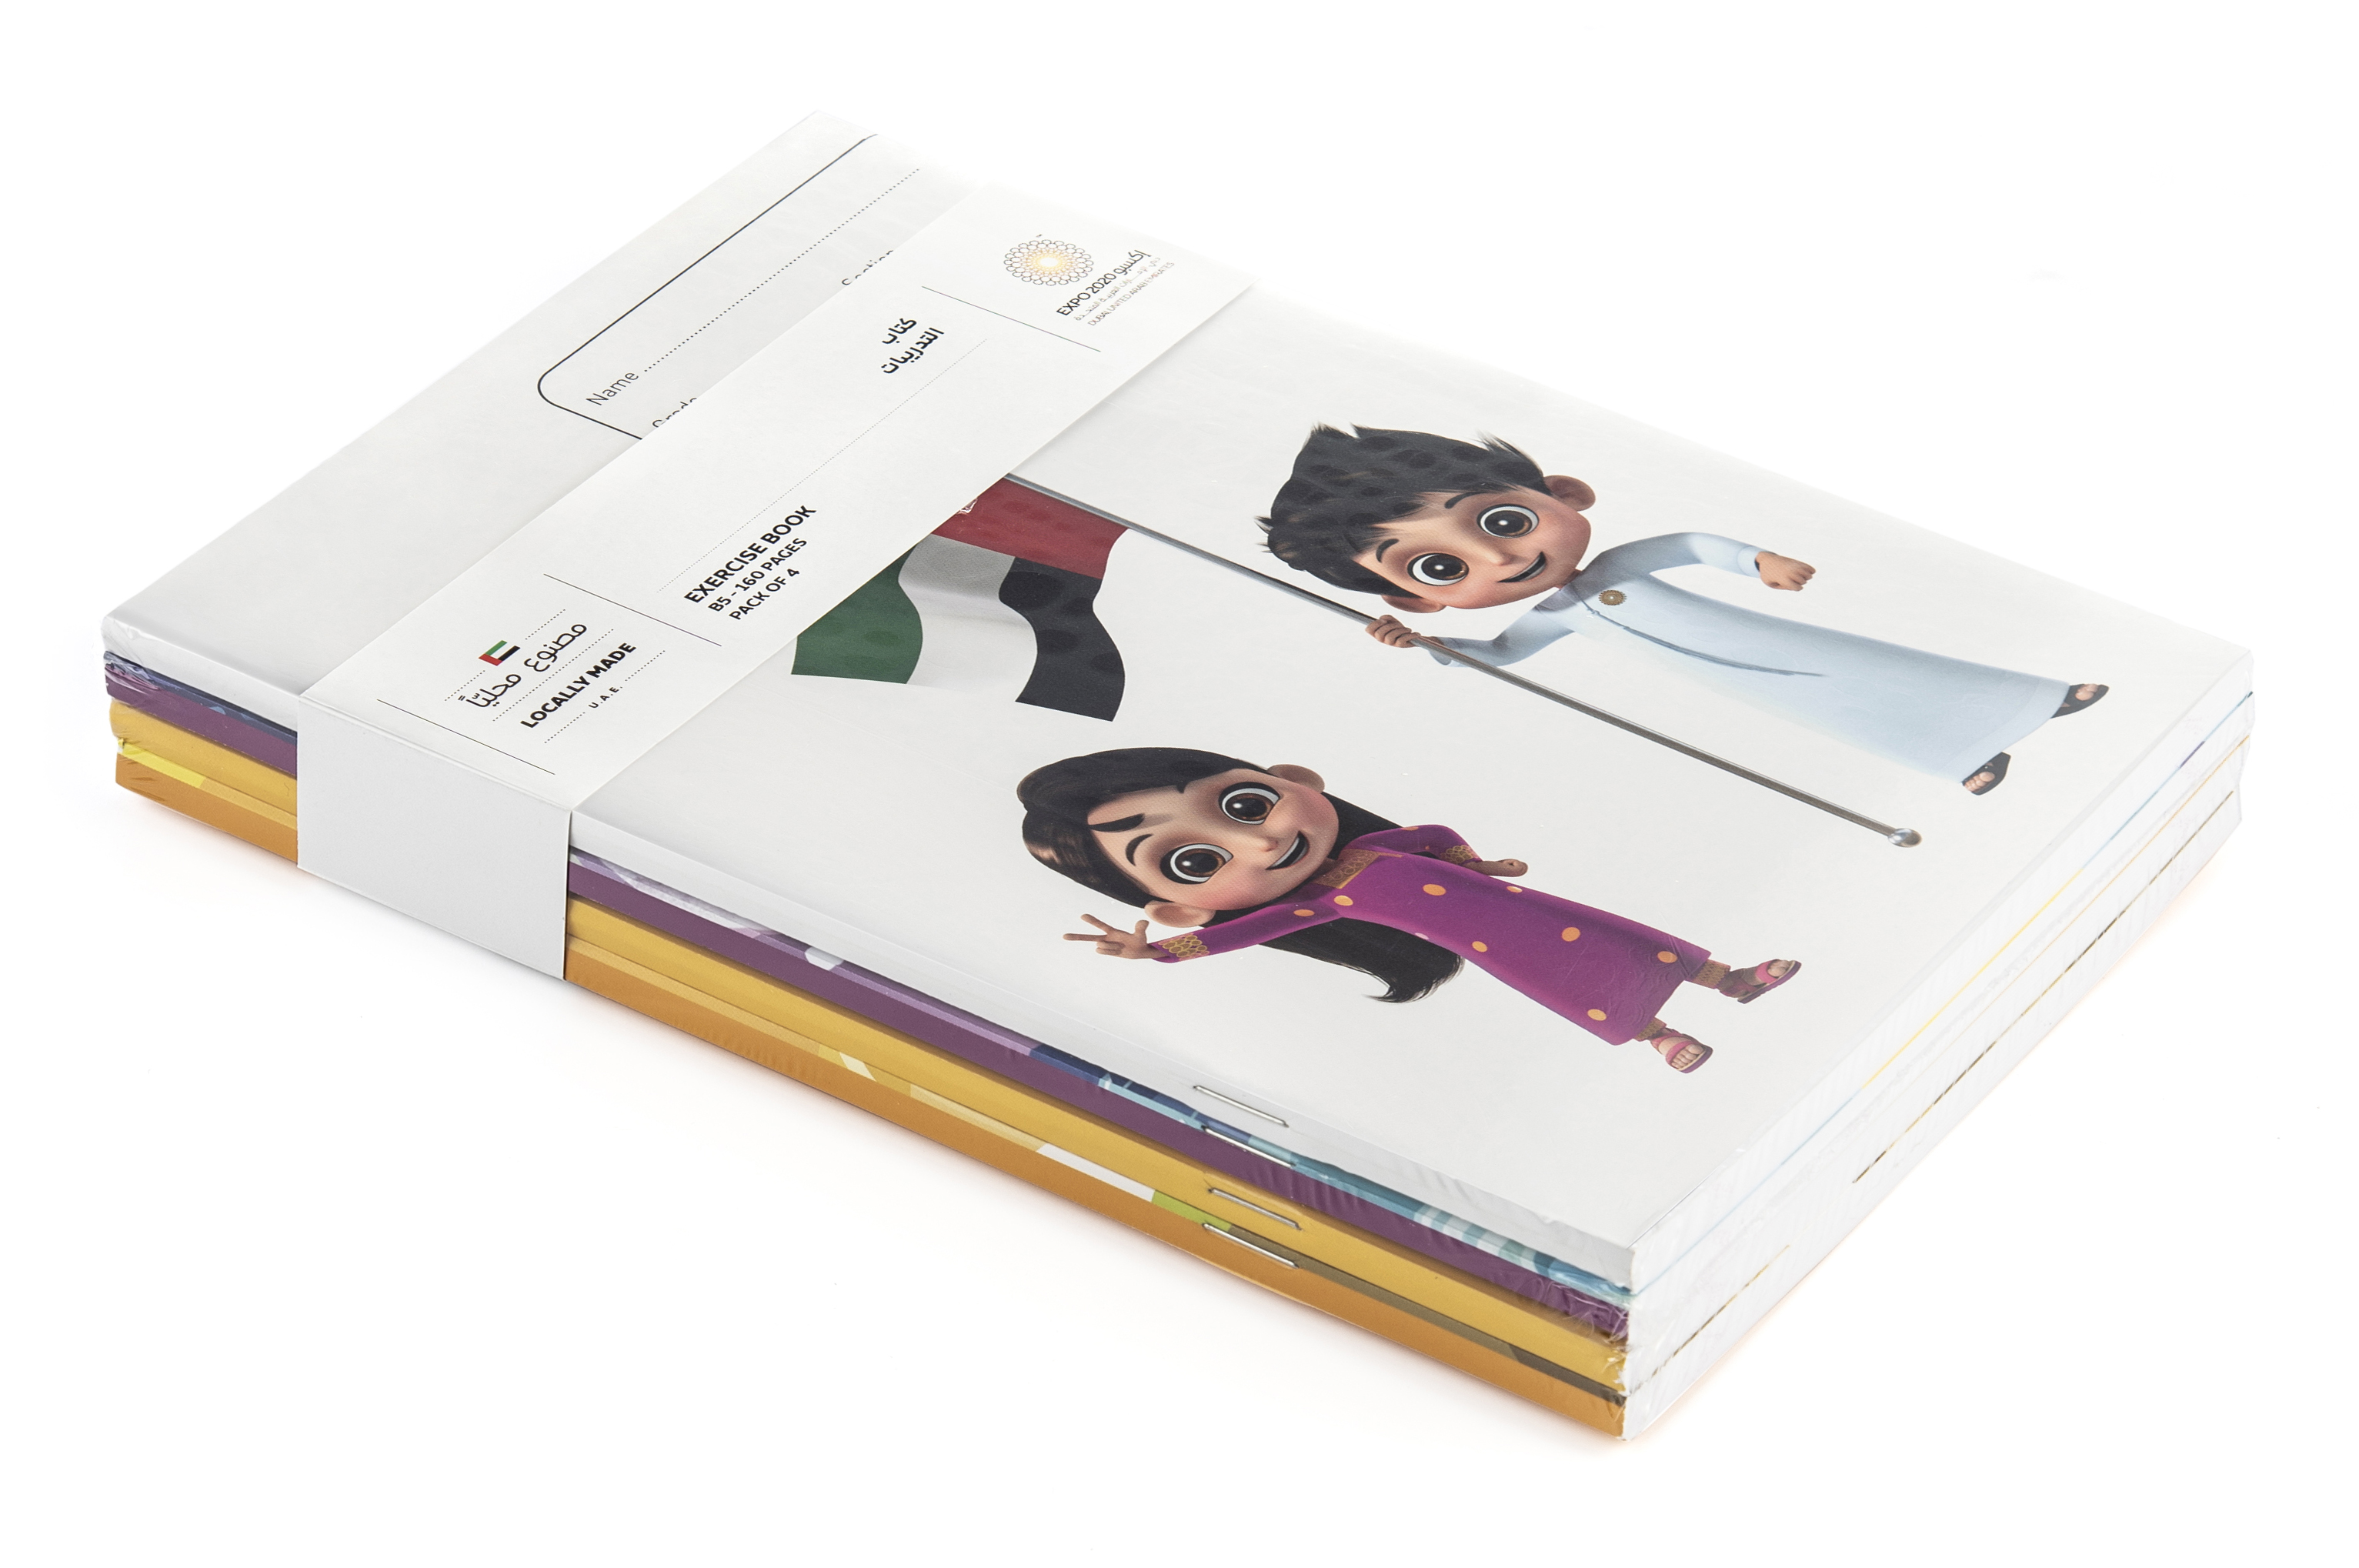 Expo 2020 Dubai Mascots B5 Exercise Books Pack of 4 - 160 Pages